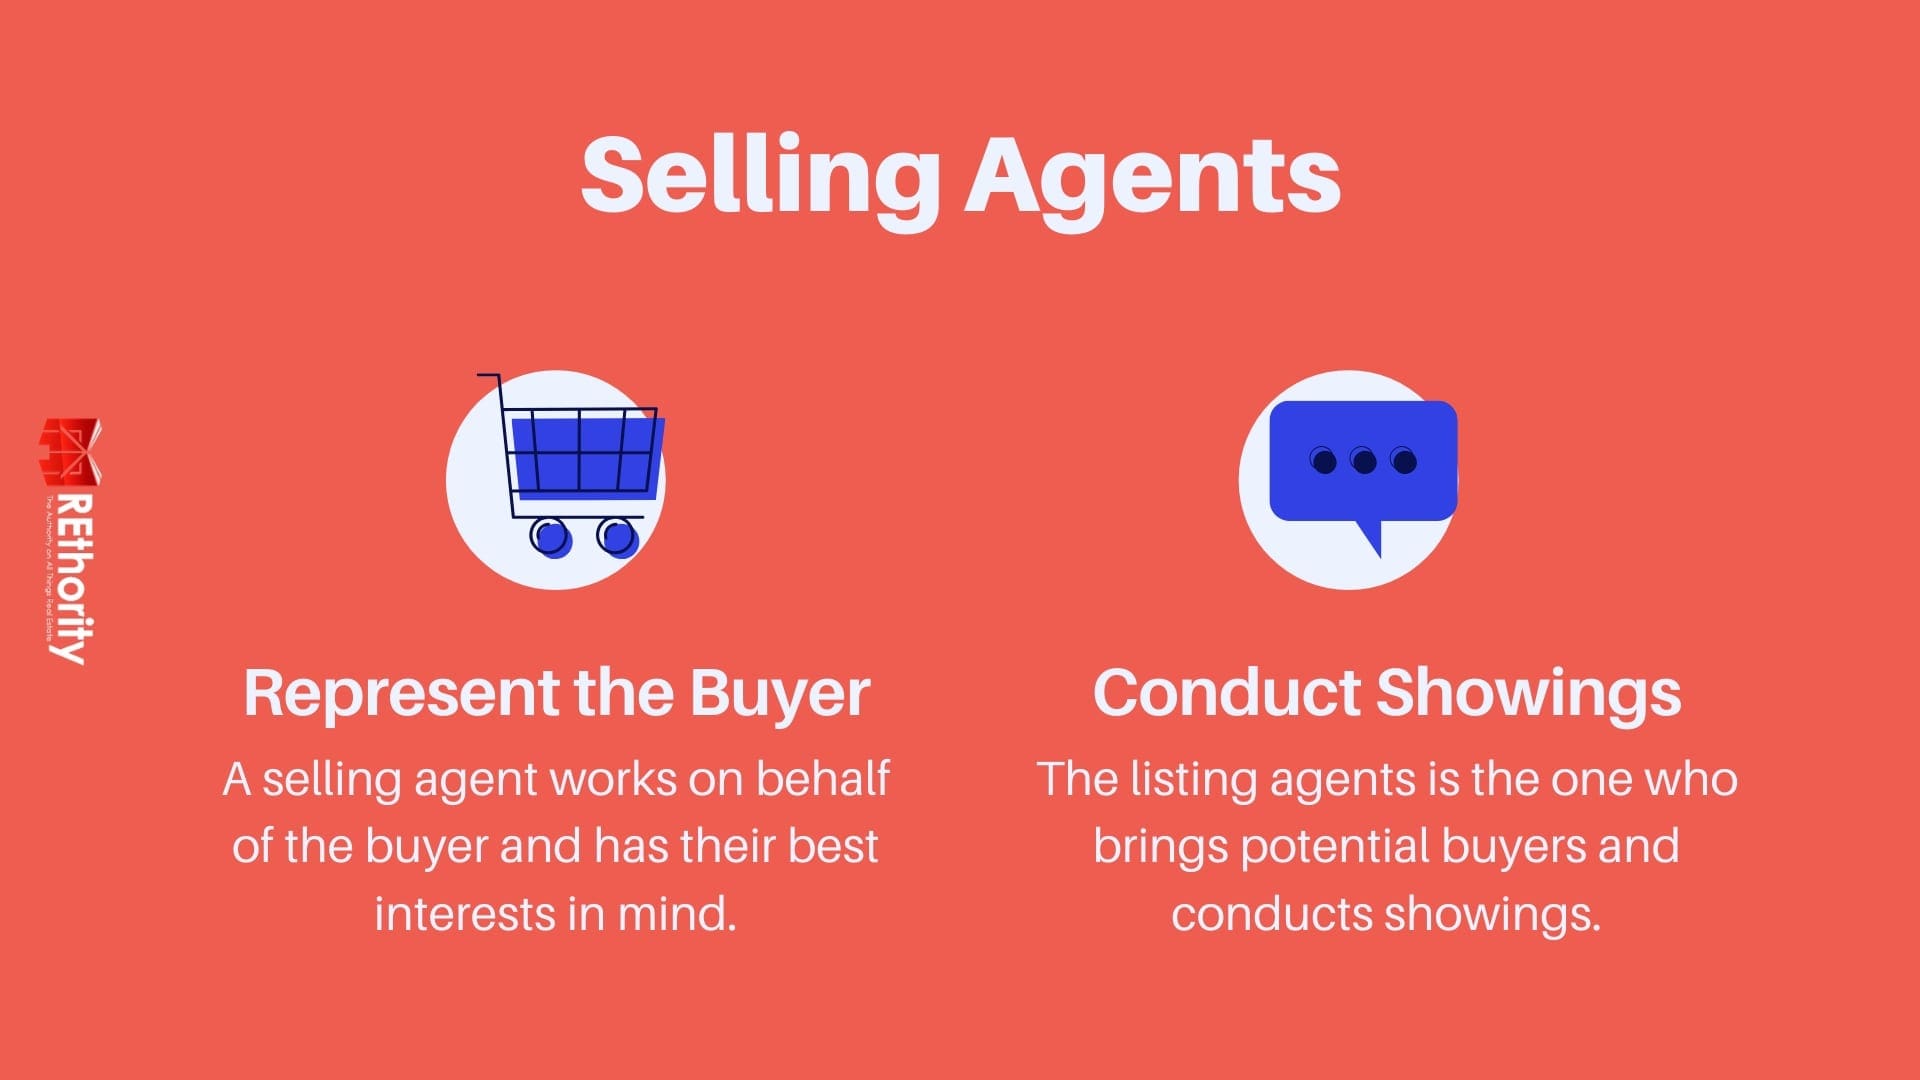 Graphic explaining what a selling agent does including the duties they perform on behalf of their clients, the buyer